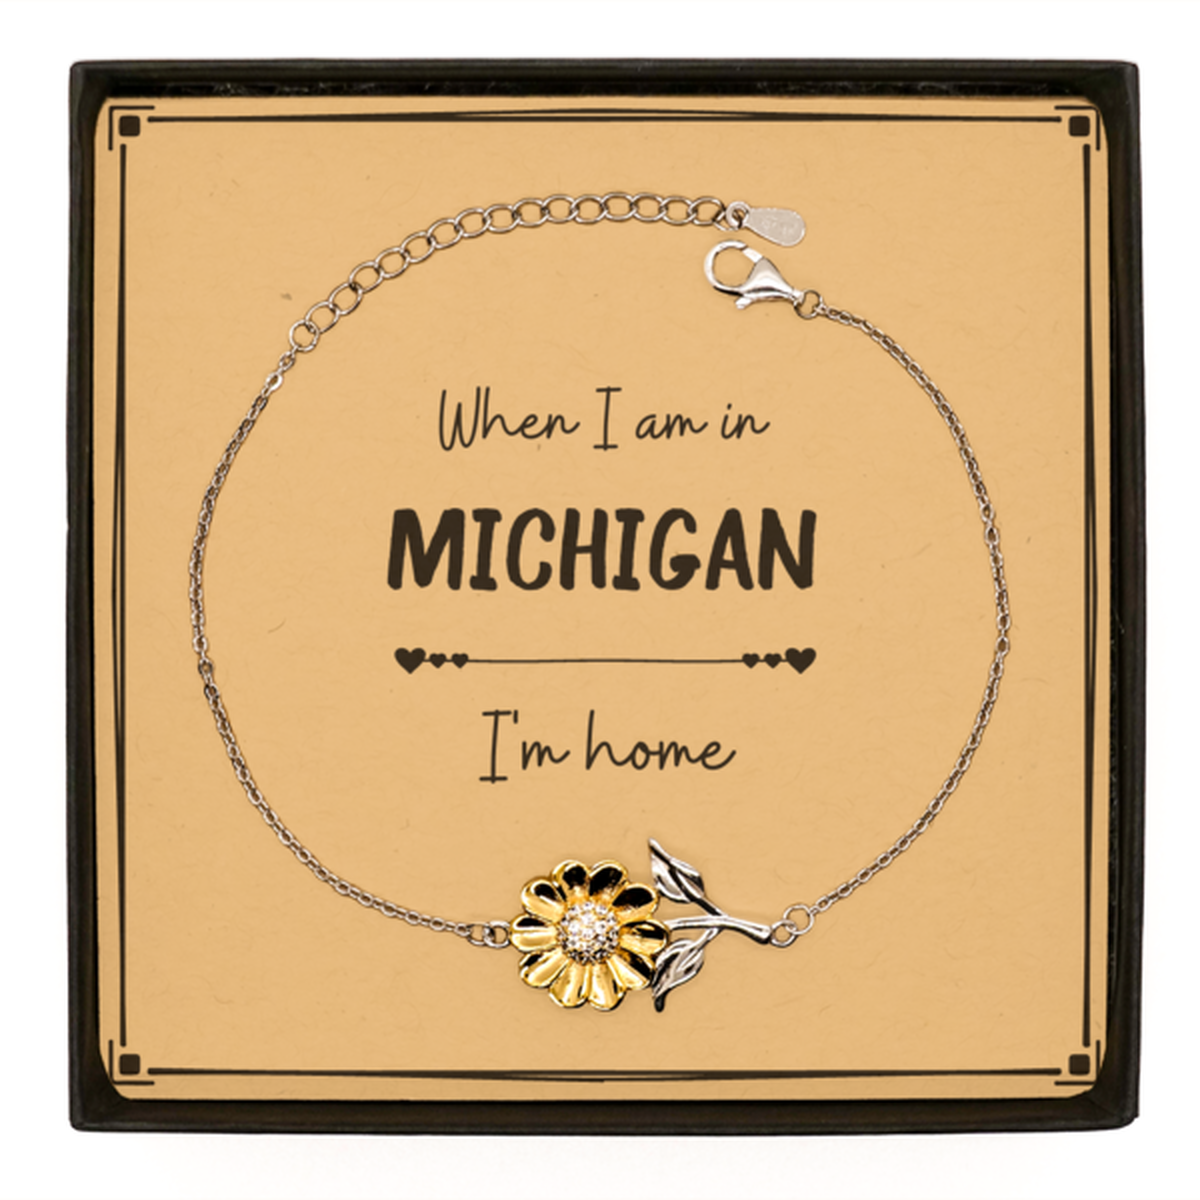 When I am in Michigan I'm home Sunflower Bracelet, Message Card Gifts For Michigan, State Michigan Birthday Gifts for Friends Coworker